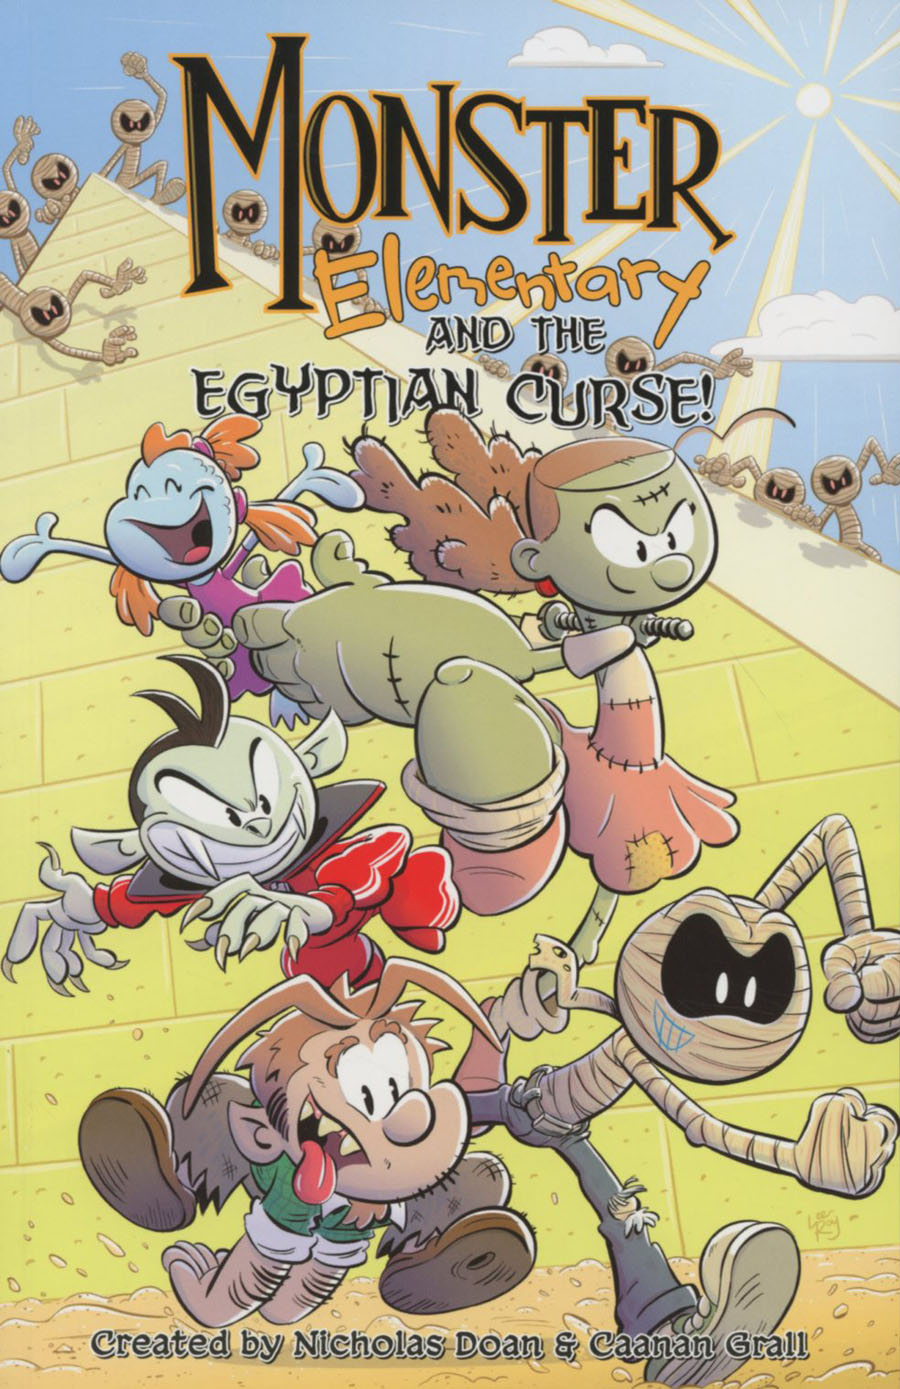 Monster Elementary Vol 2 Monster Elementary And The Egyptian Curse TP